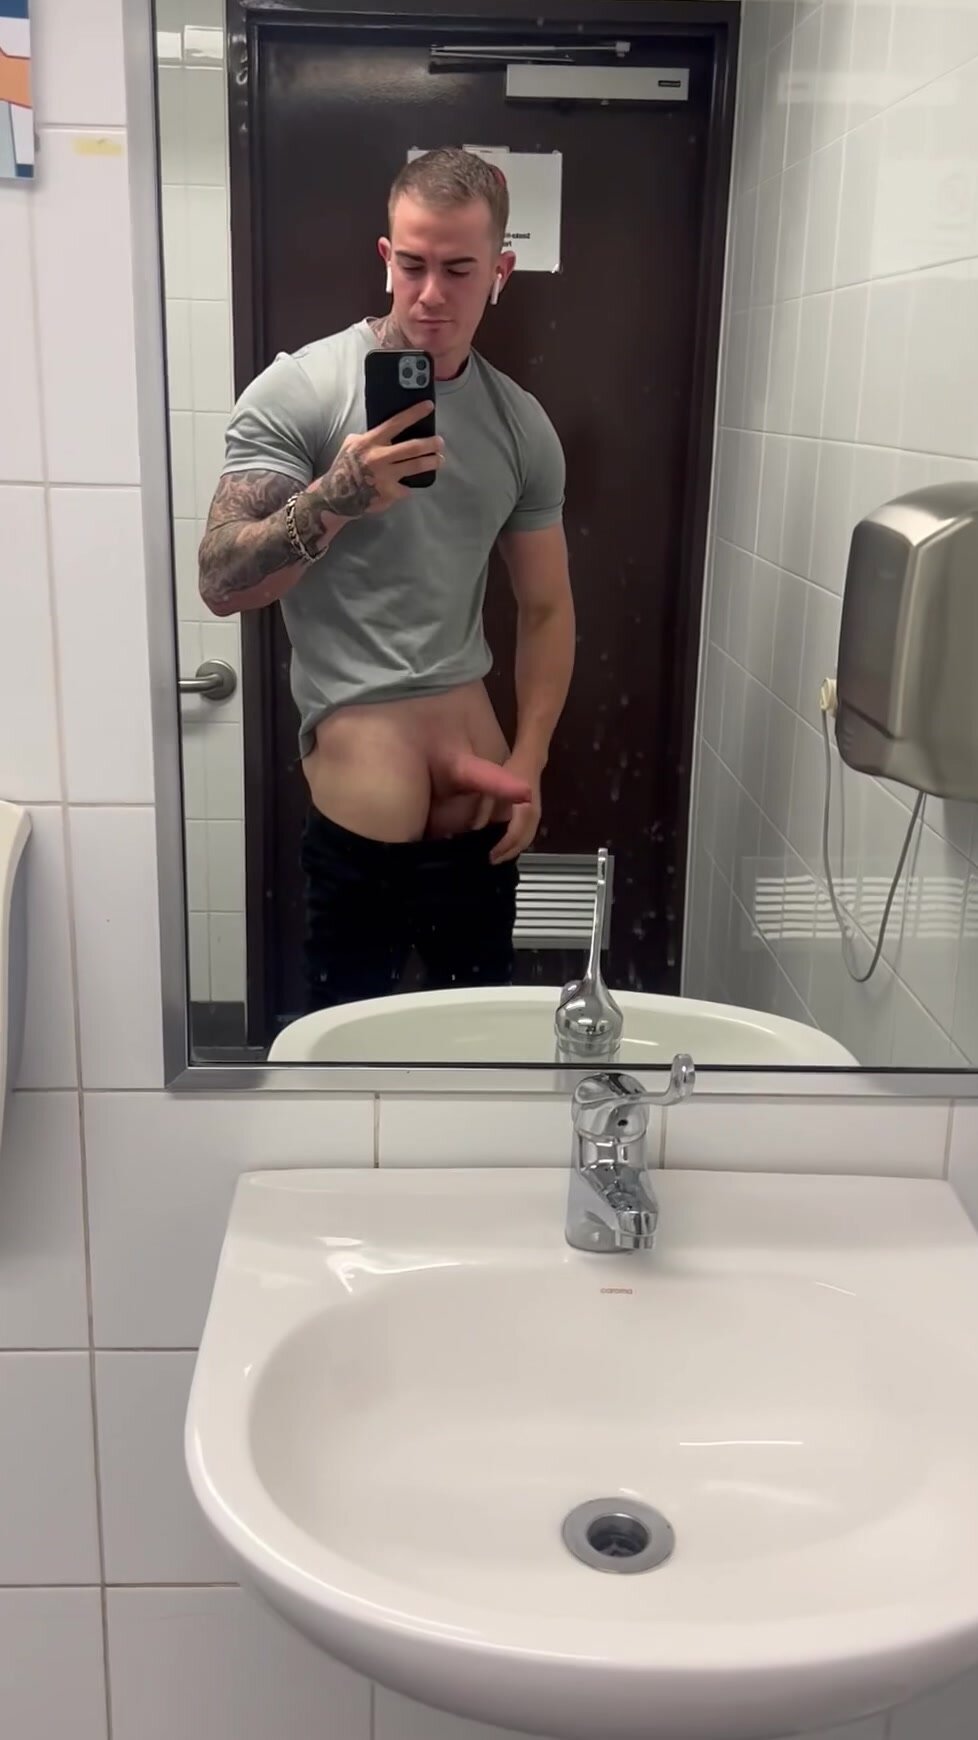 Hot Aussie stripper whips out his fat dong at gym